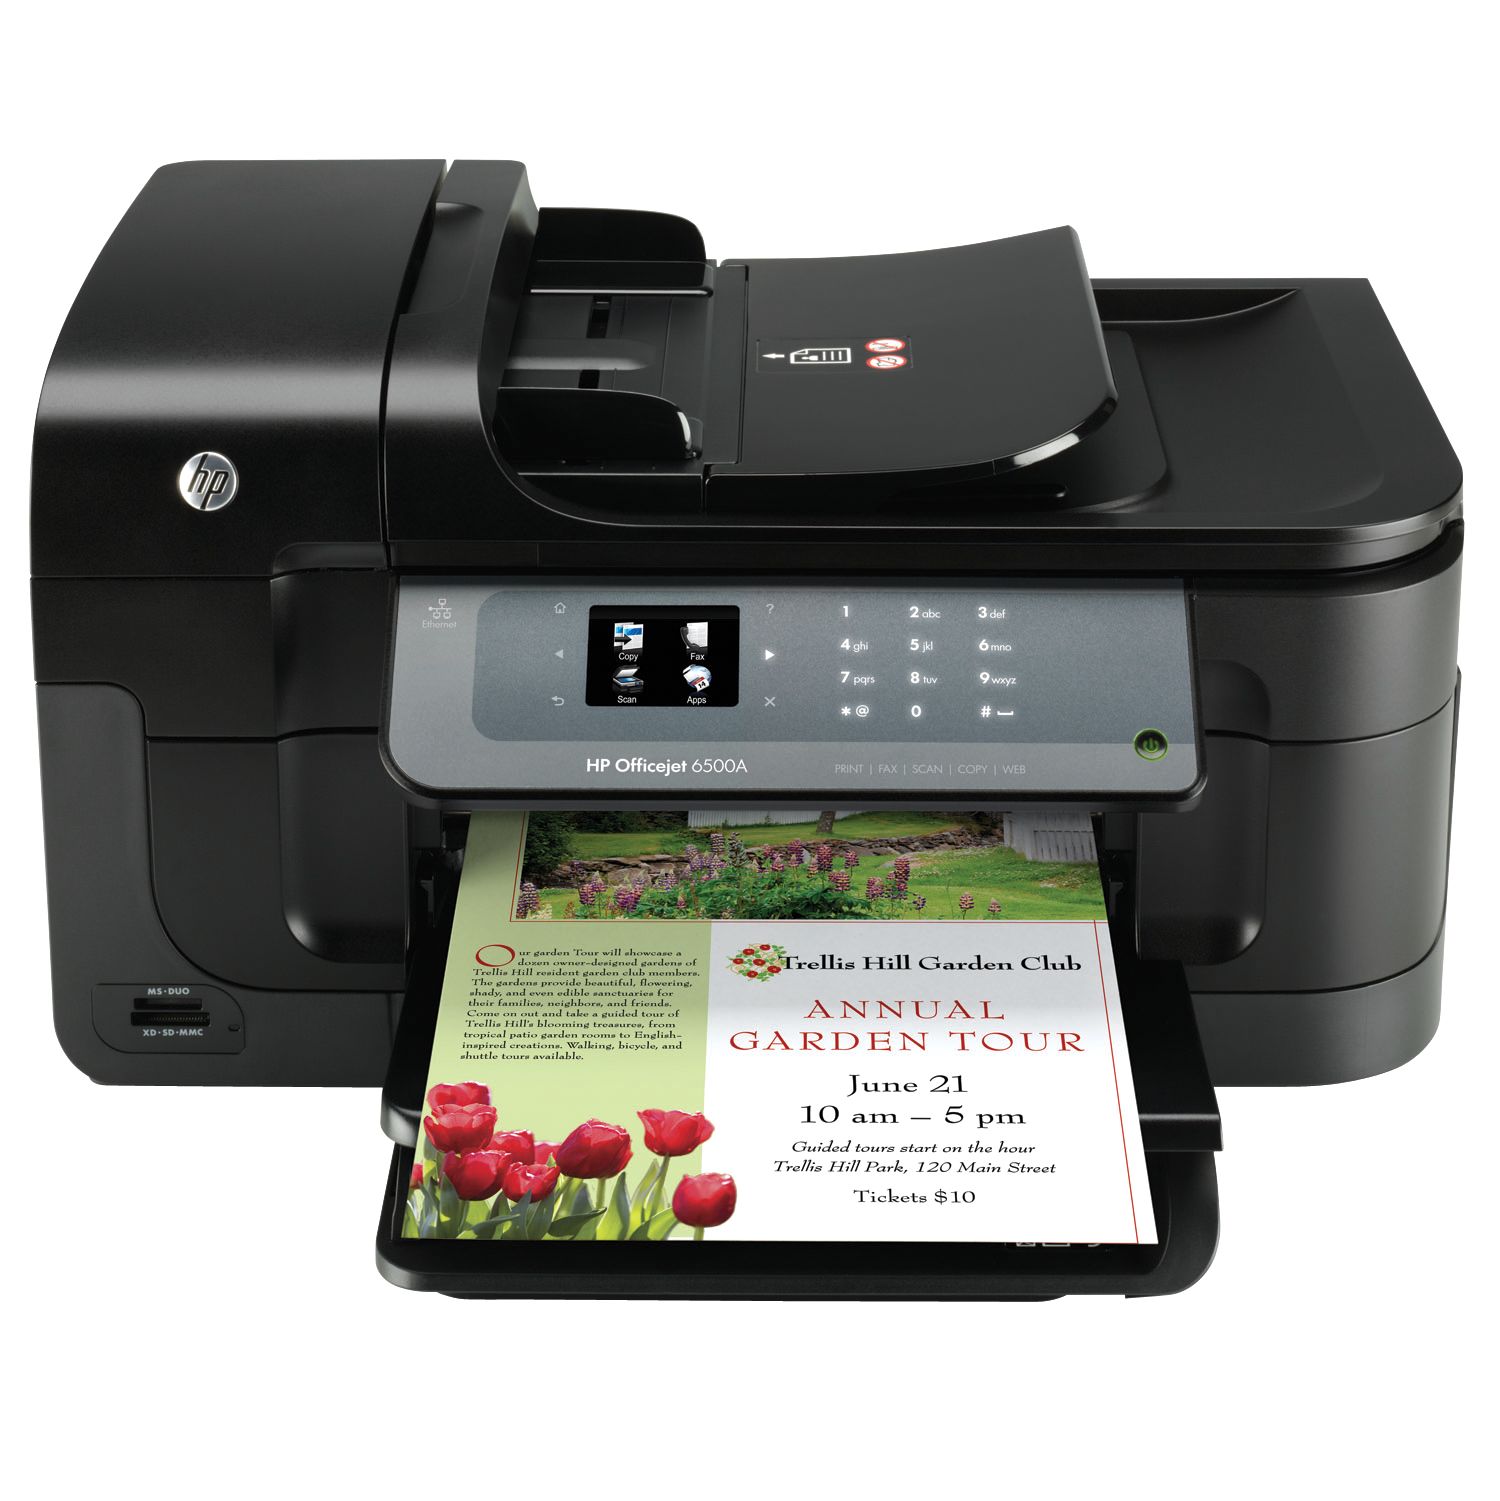 HP Officejet Pro 6500A Wireless e-All-in-One Printer at John Lewis